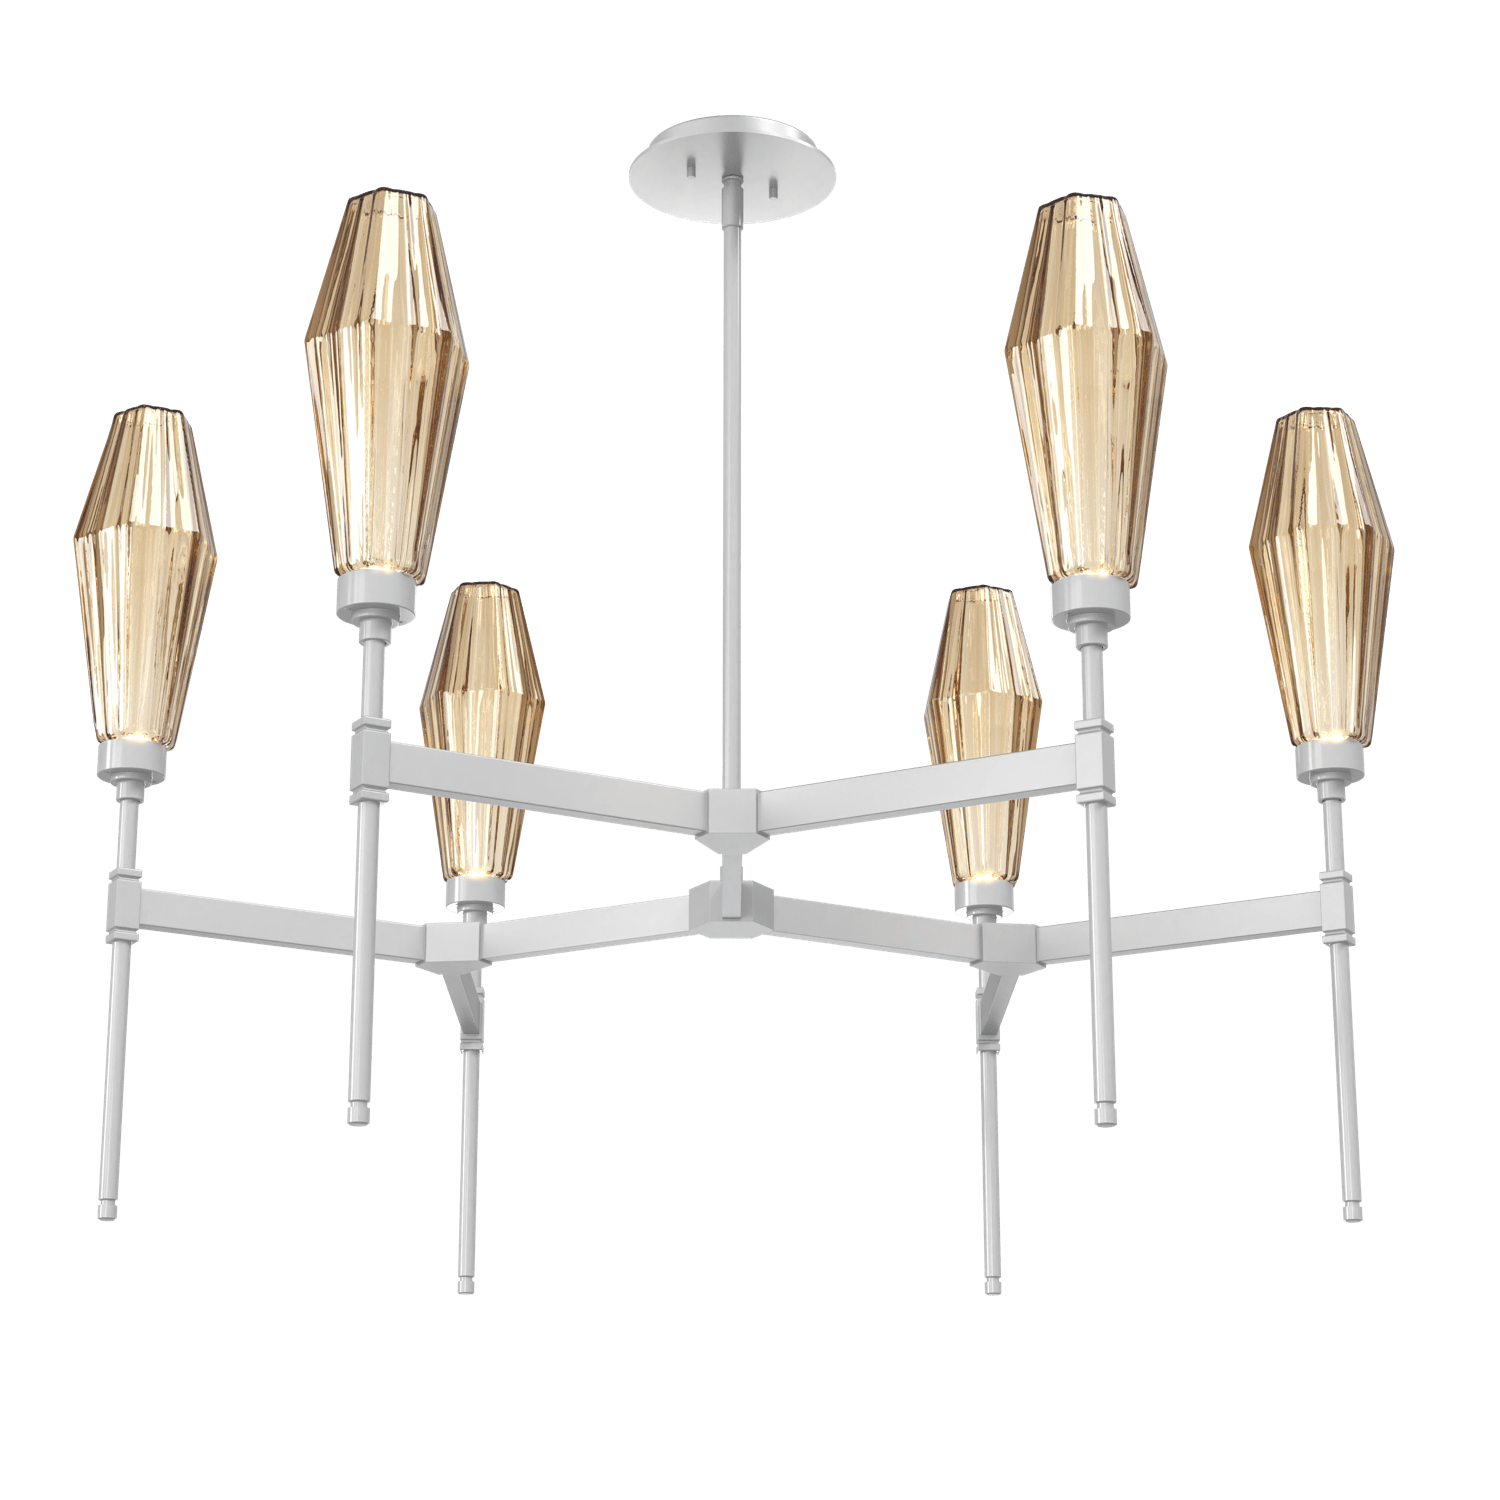 CHB0049-37-CS-RB-Hammerton-Studio-Aalto-37-inch-round-belvedere-chandelier-with-classic-silver-finish-and-optic-ribbed-bronze-glass-shades-and-LED-lamping